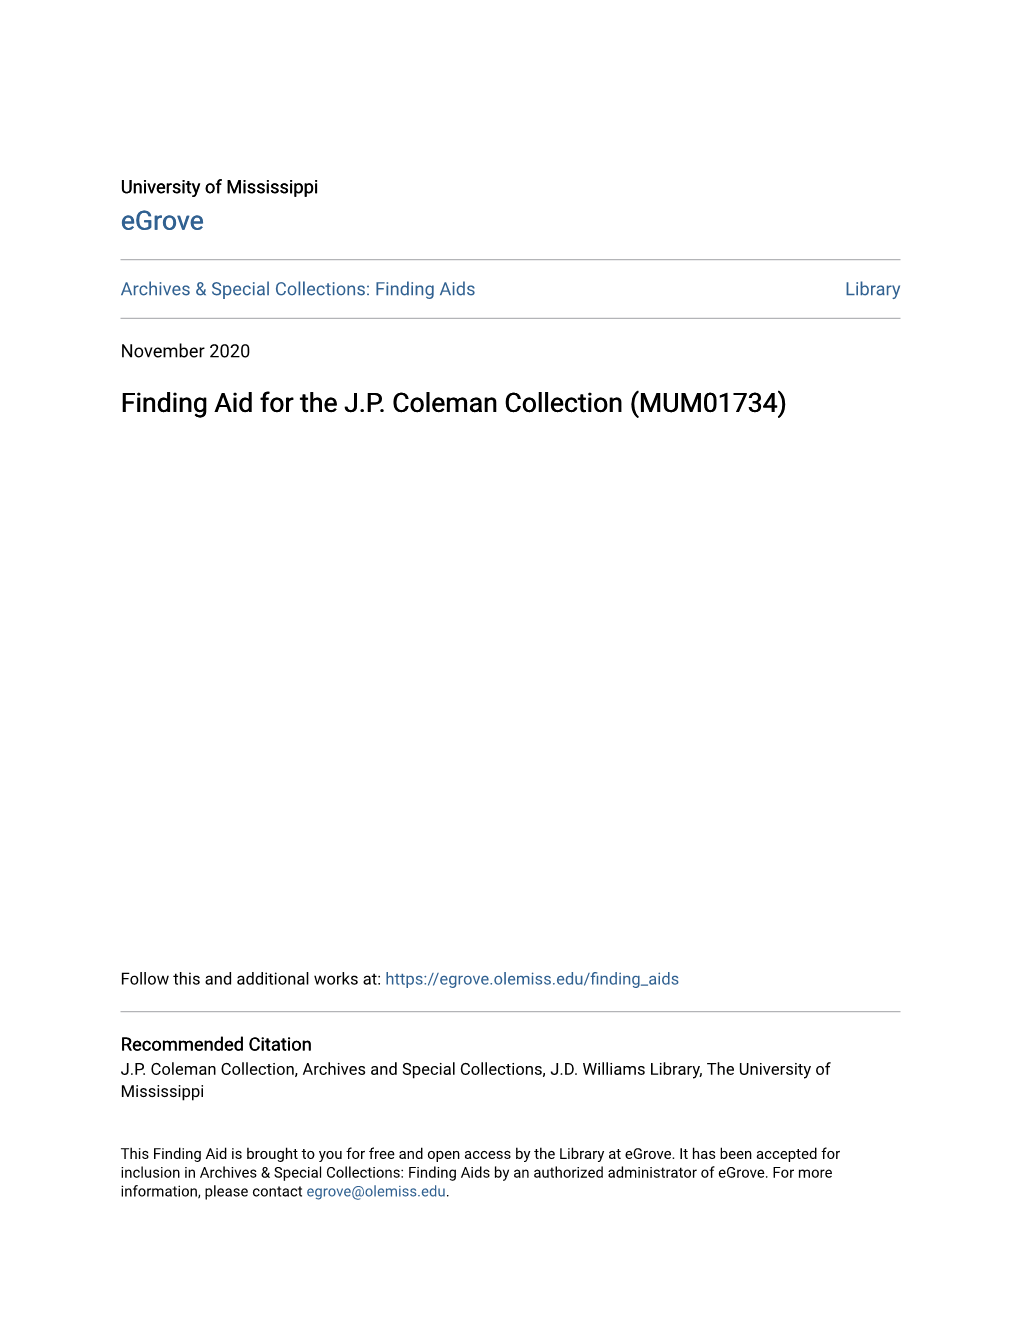 Finding Aid for the JP Coleman Collection